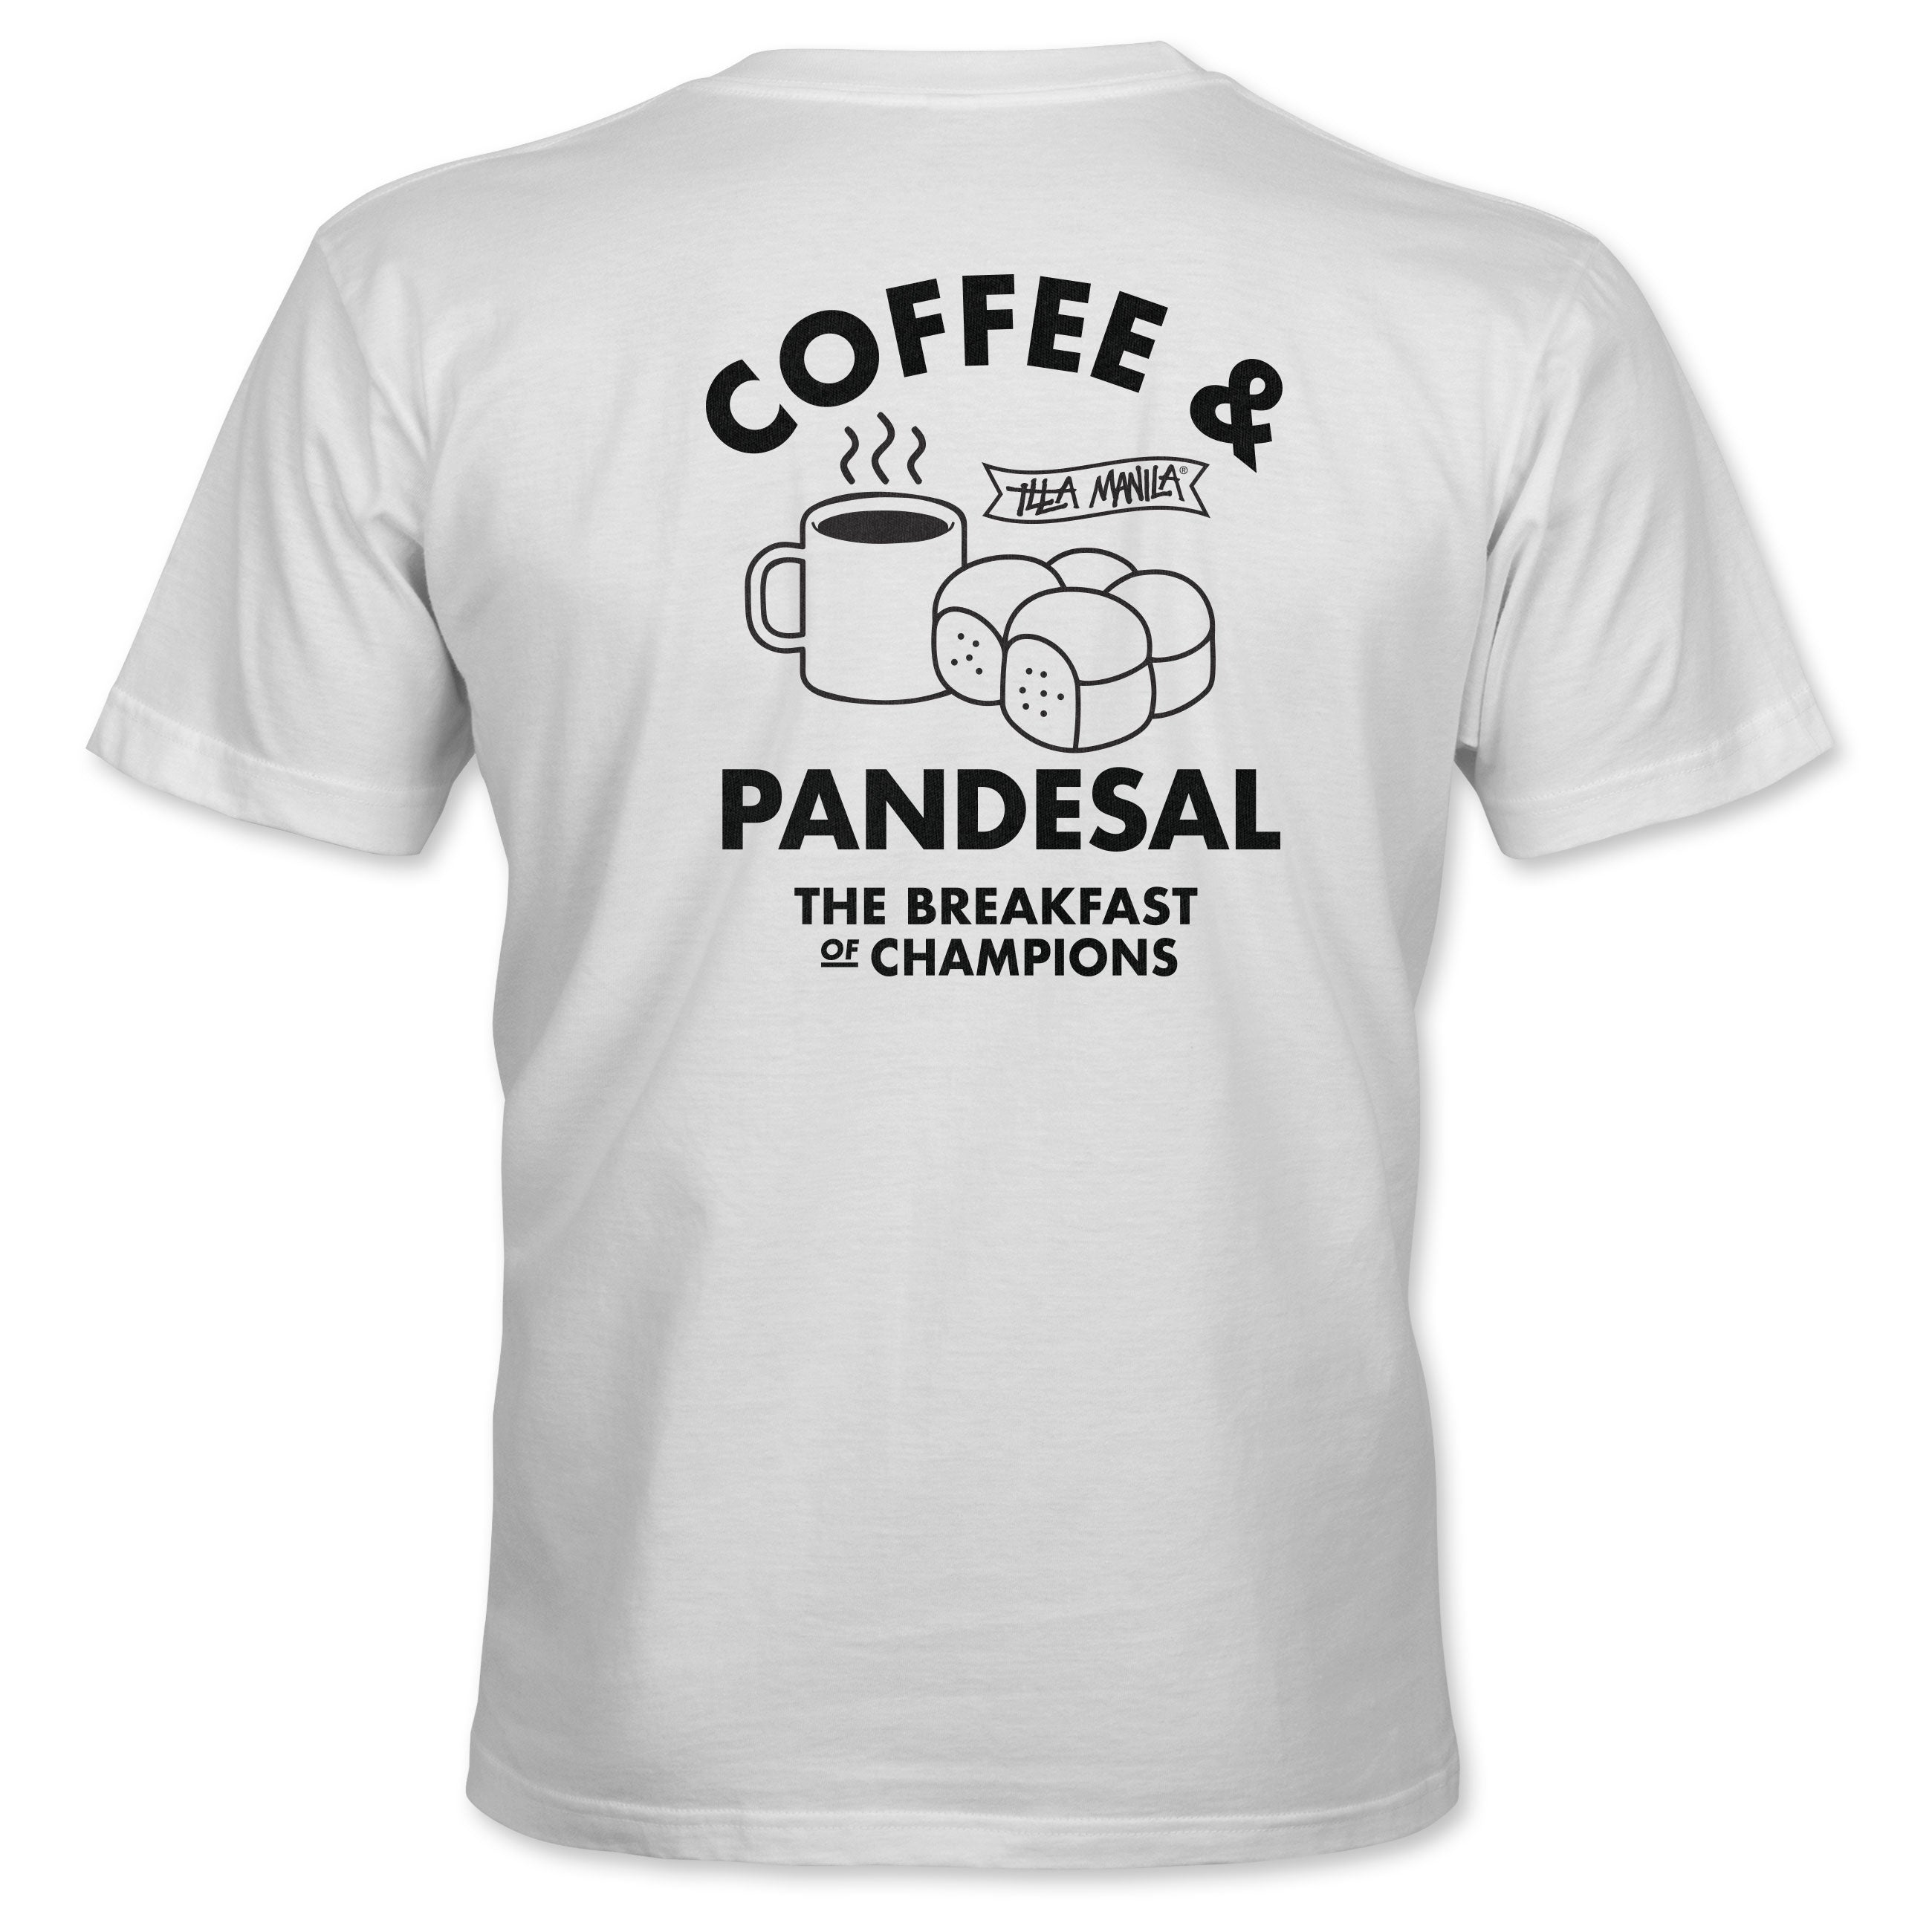 Coffee and Pandesal T-shirt - White